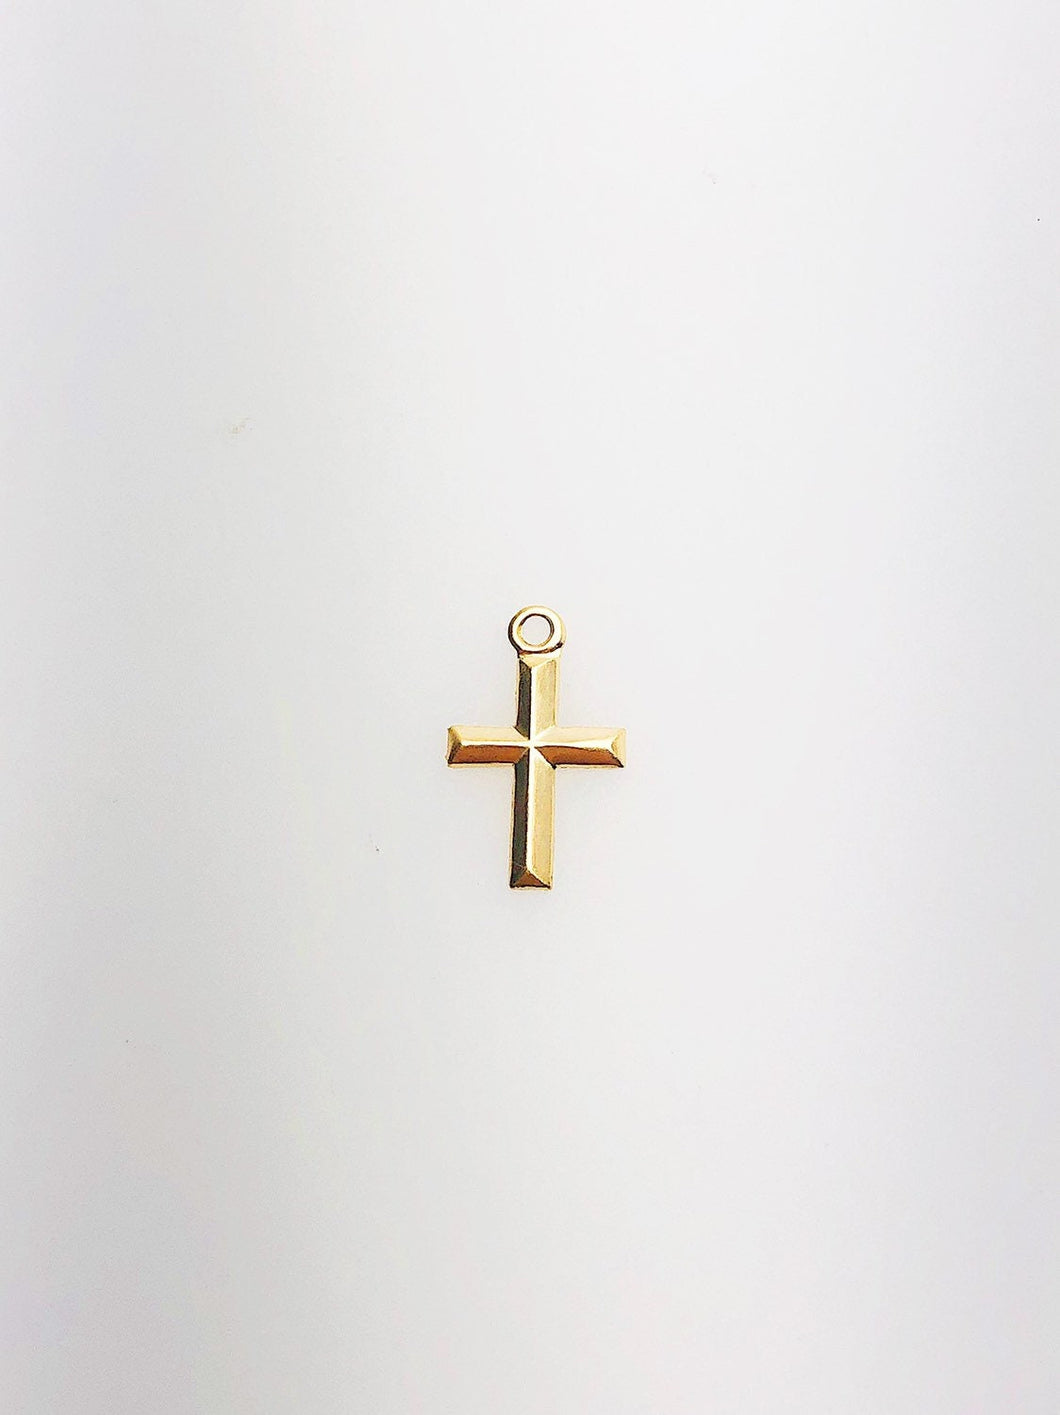 14K Gold Fill Cross Charm w/ Ring, 7.0x11.2mm, Made in USA - 21